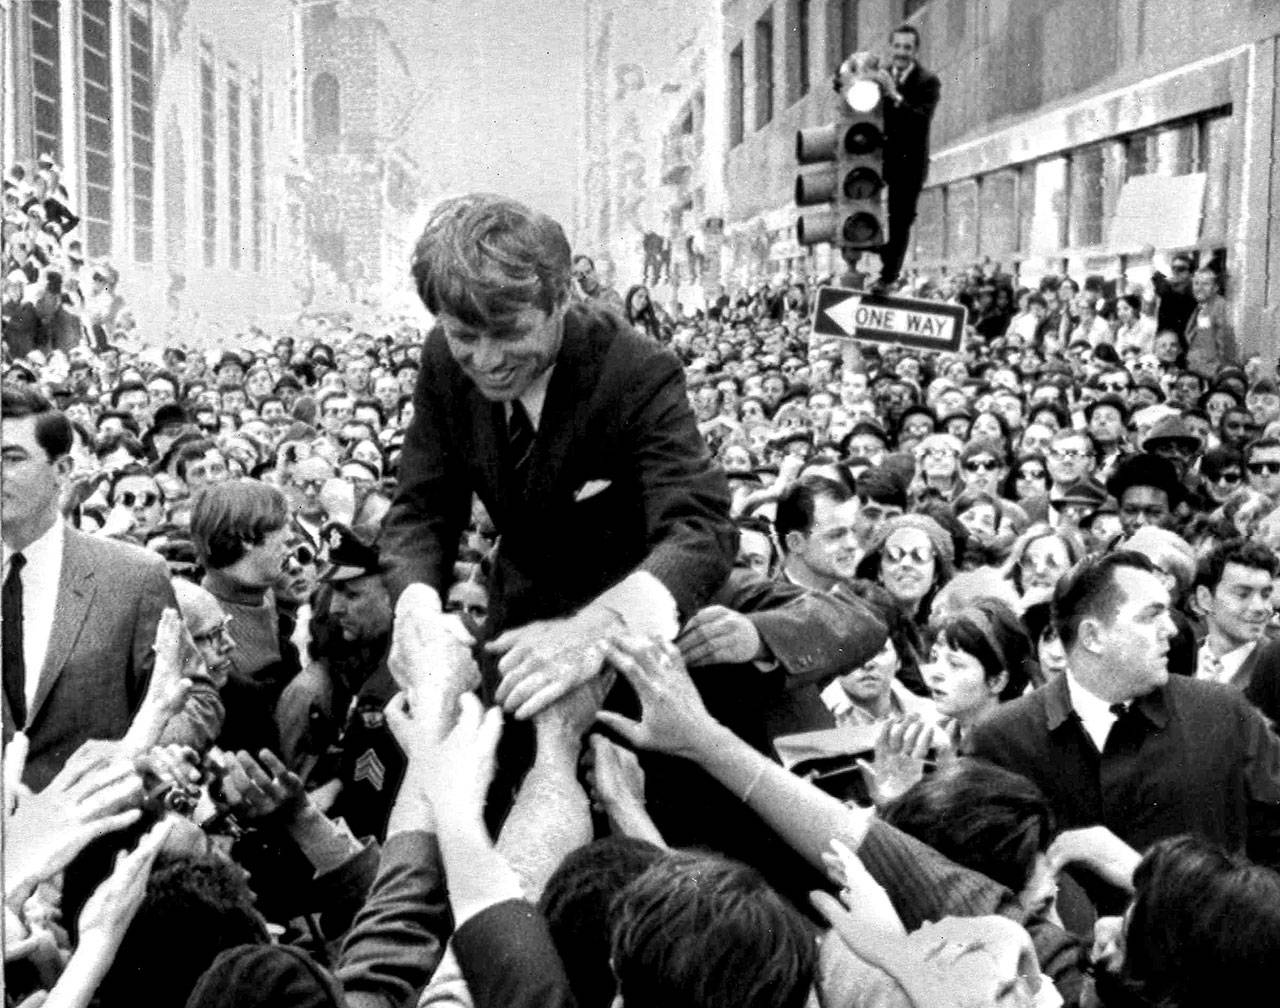 Senator Robert Kennedy is surrounded by hundreds of people as he leans down to shake hands during a campaign appearance at a street corner in central Philadelphia on April 2, 1968. (Associated Press)